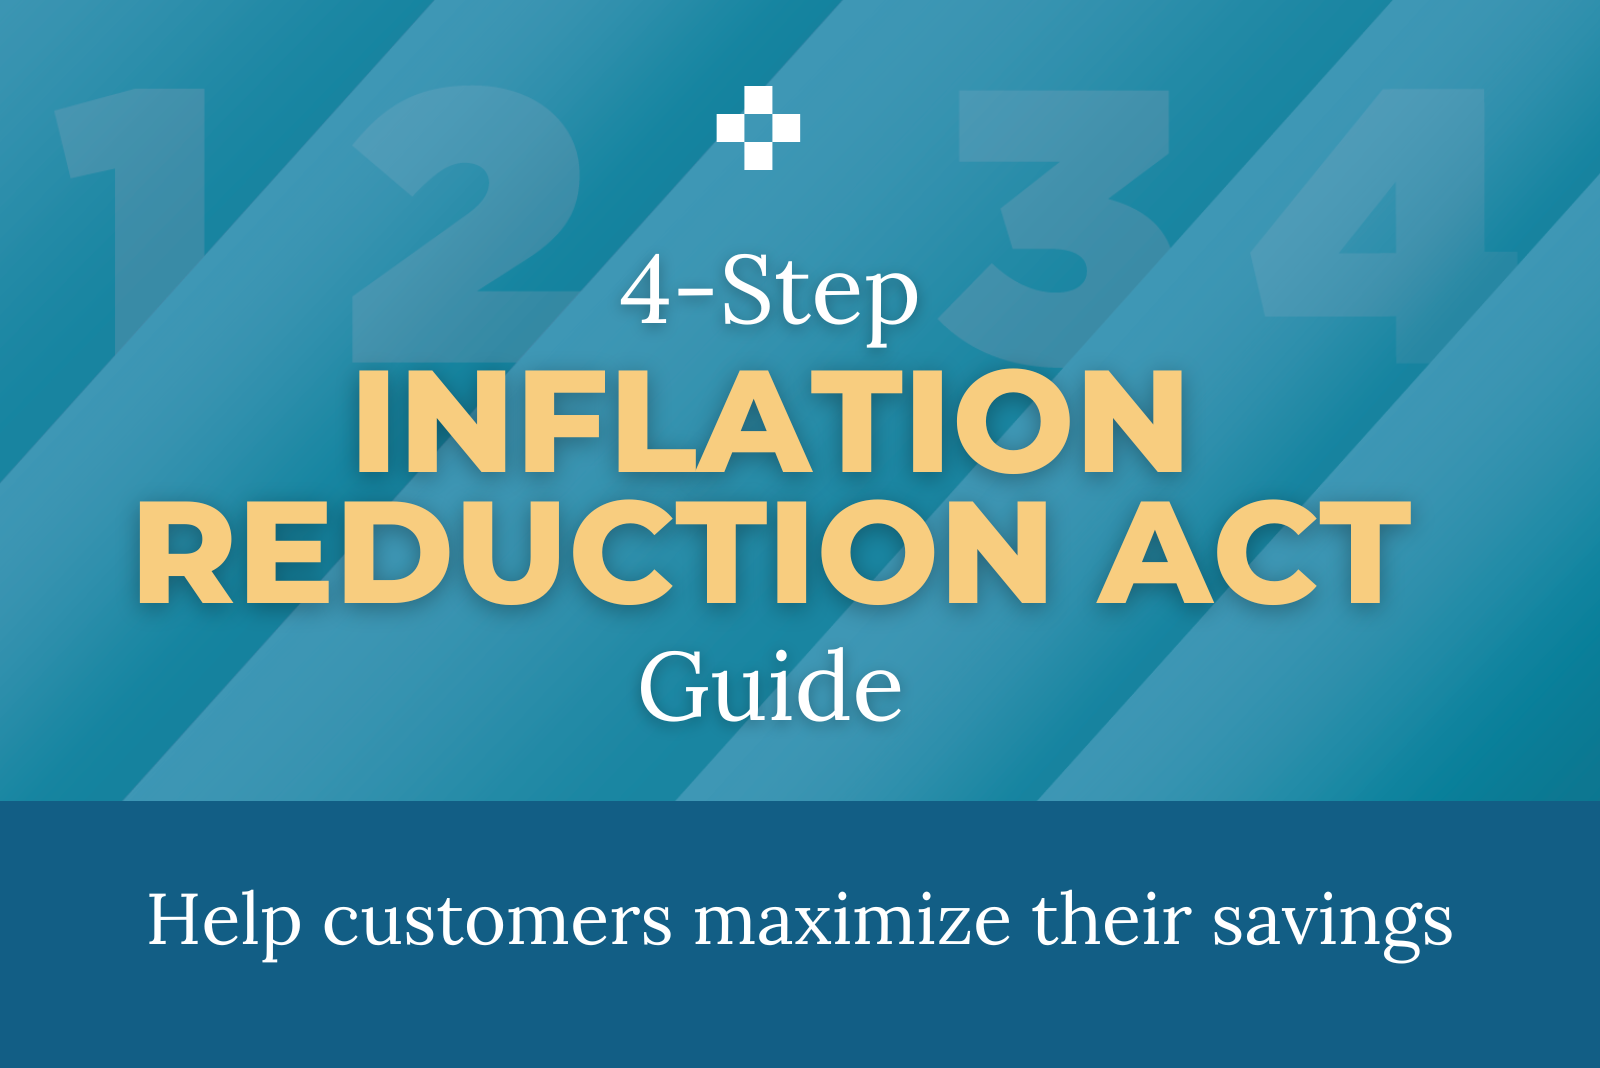 4 Step Inflation Reduction Act Guide